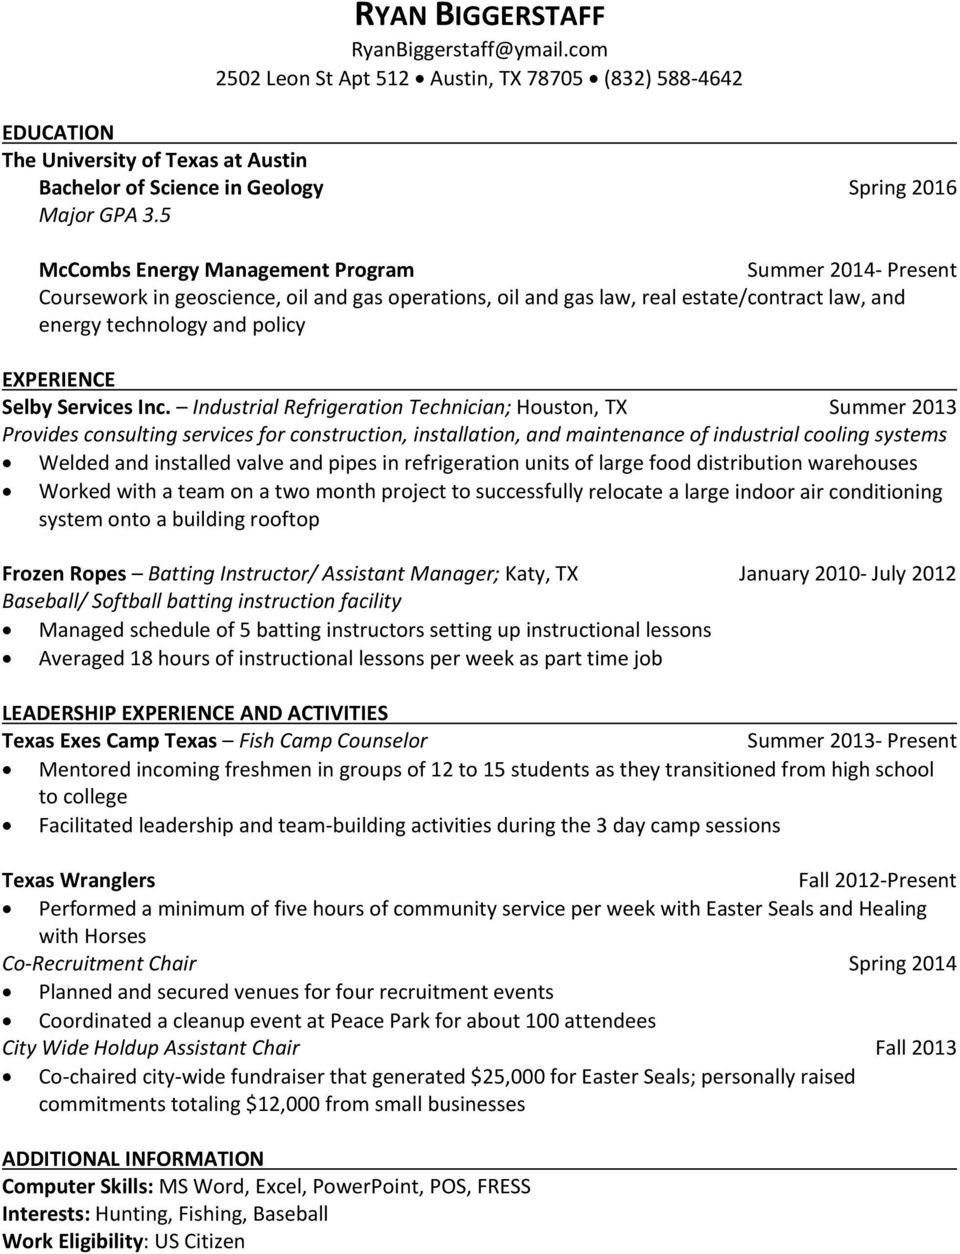 University Of Texas Mccombs Resume Template Mccombs Energy Management Students Resumes for Land Positions …